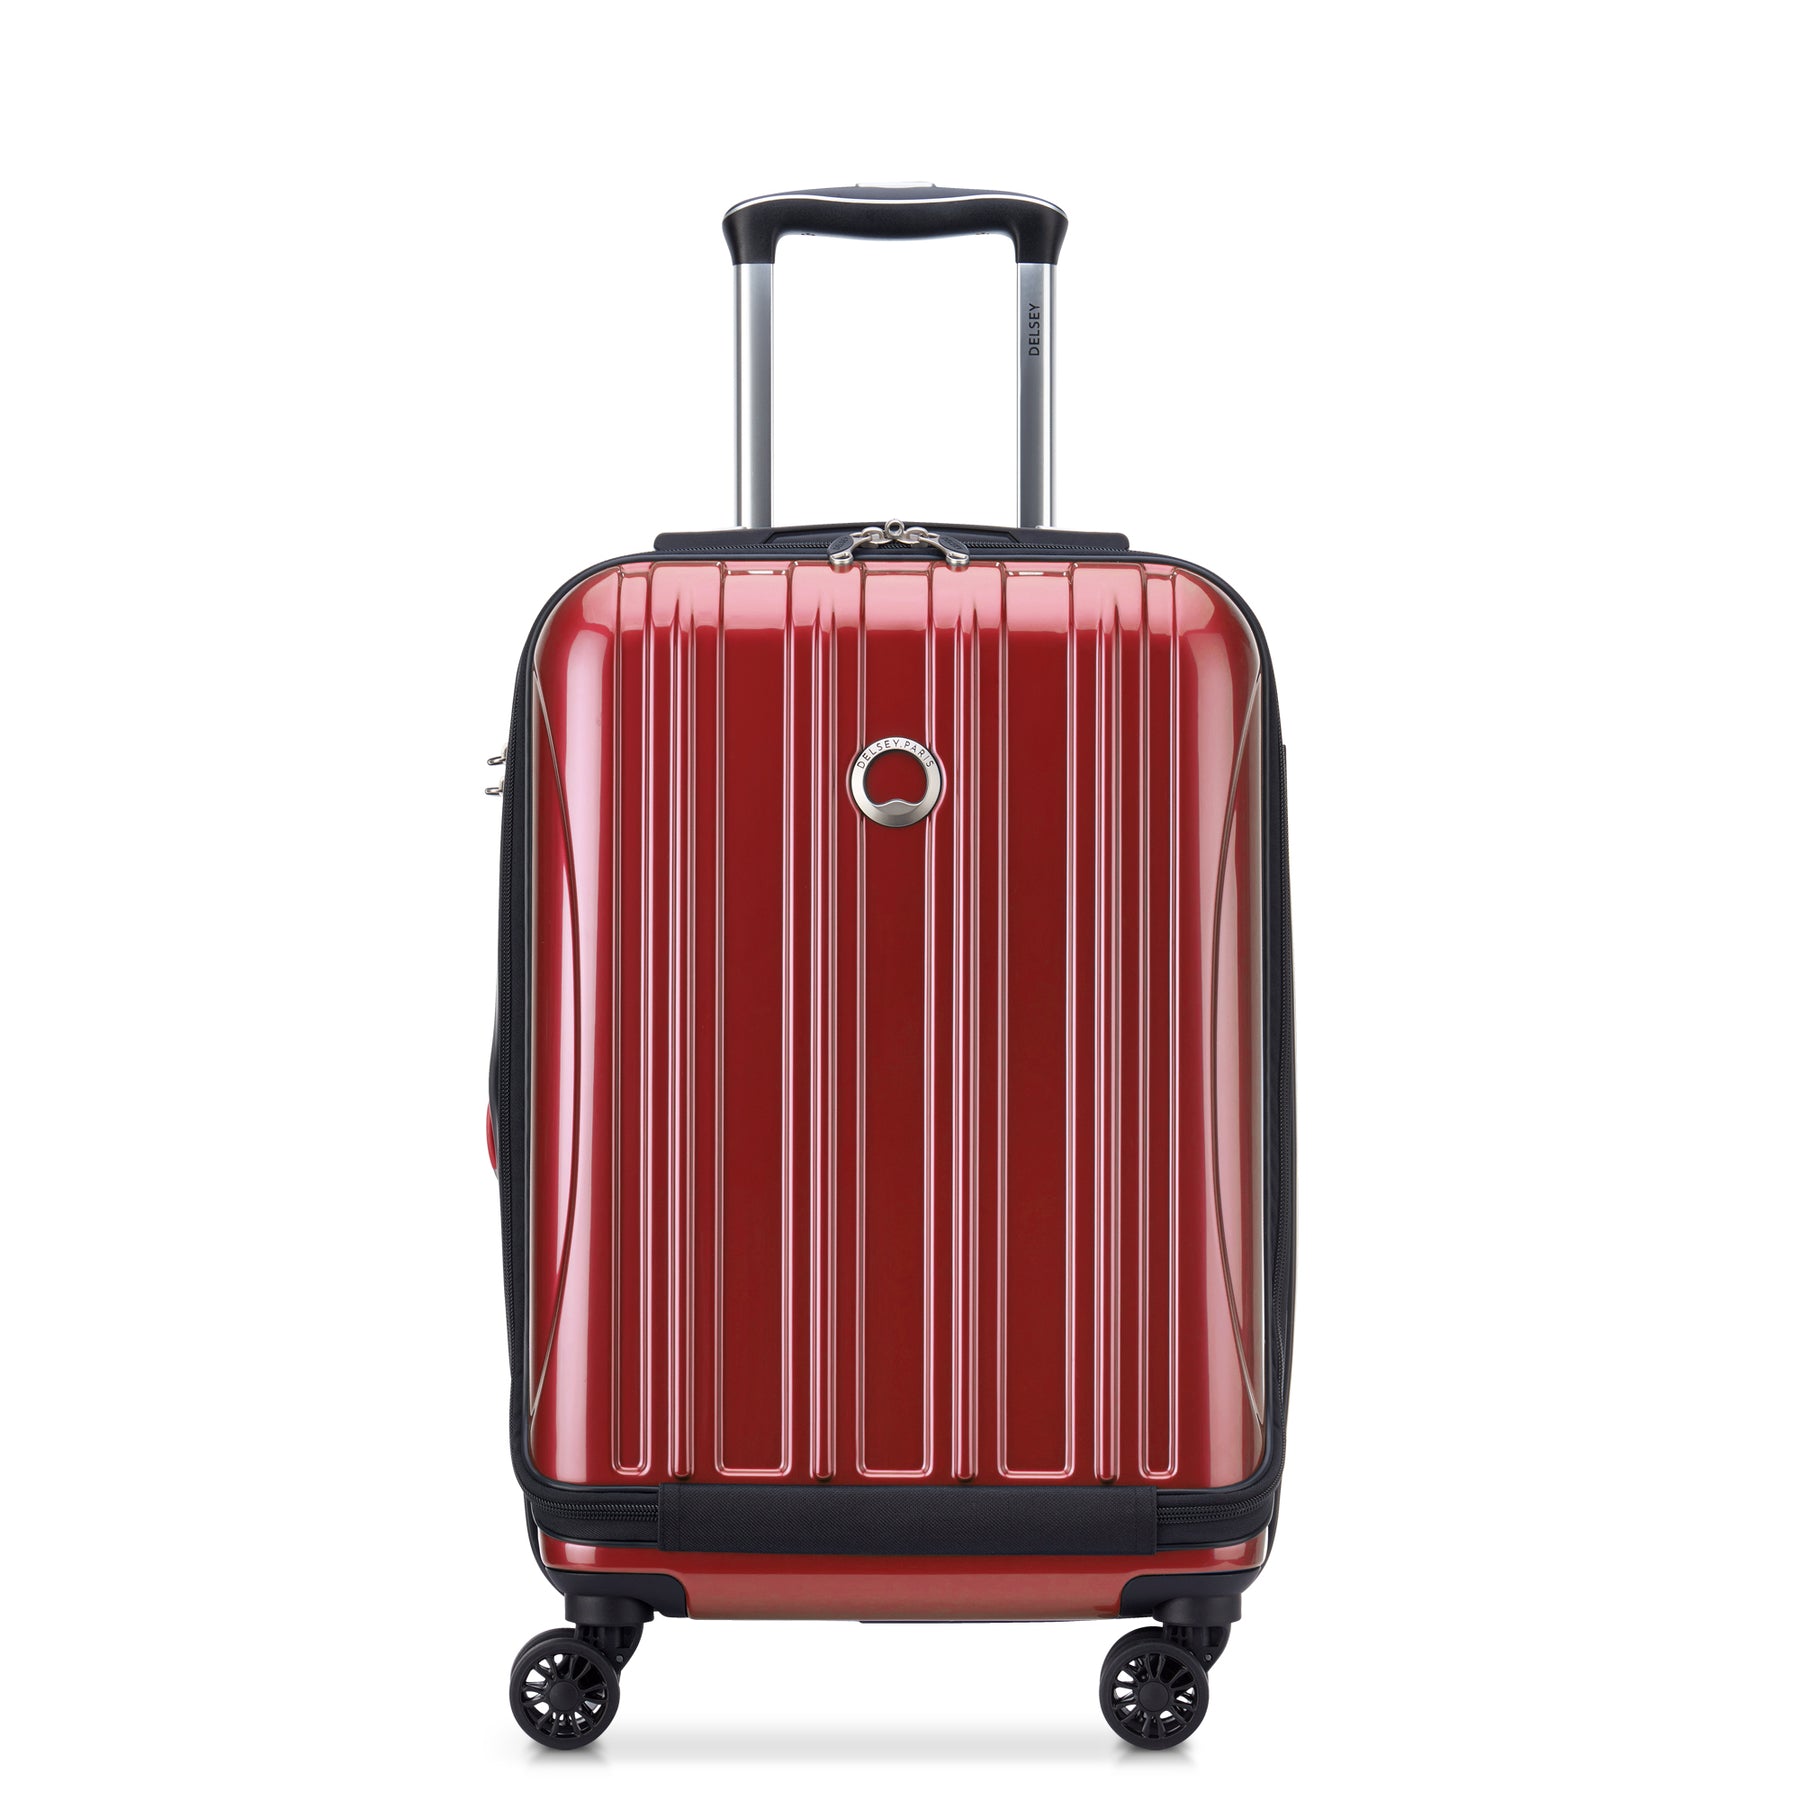 DELSEY PARIS Helium Aero 19" Hardside Expandable Spinner Carry-On Luggage, Red - image 5 of 8